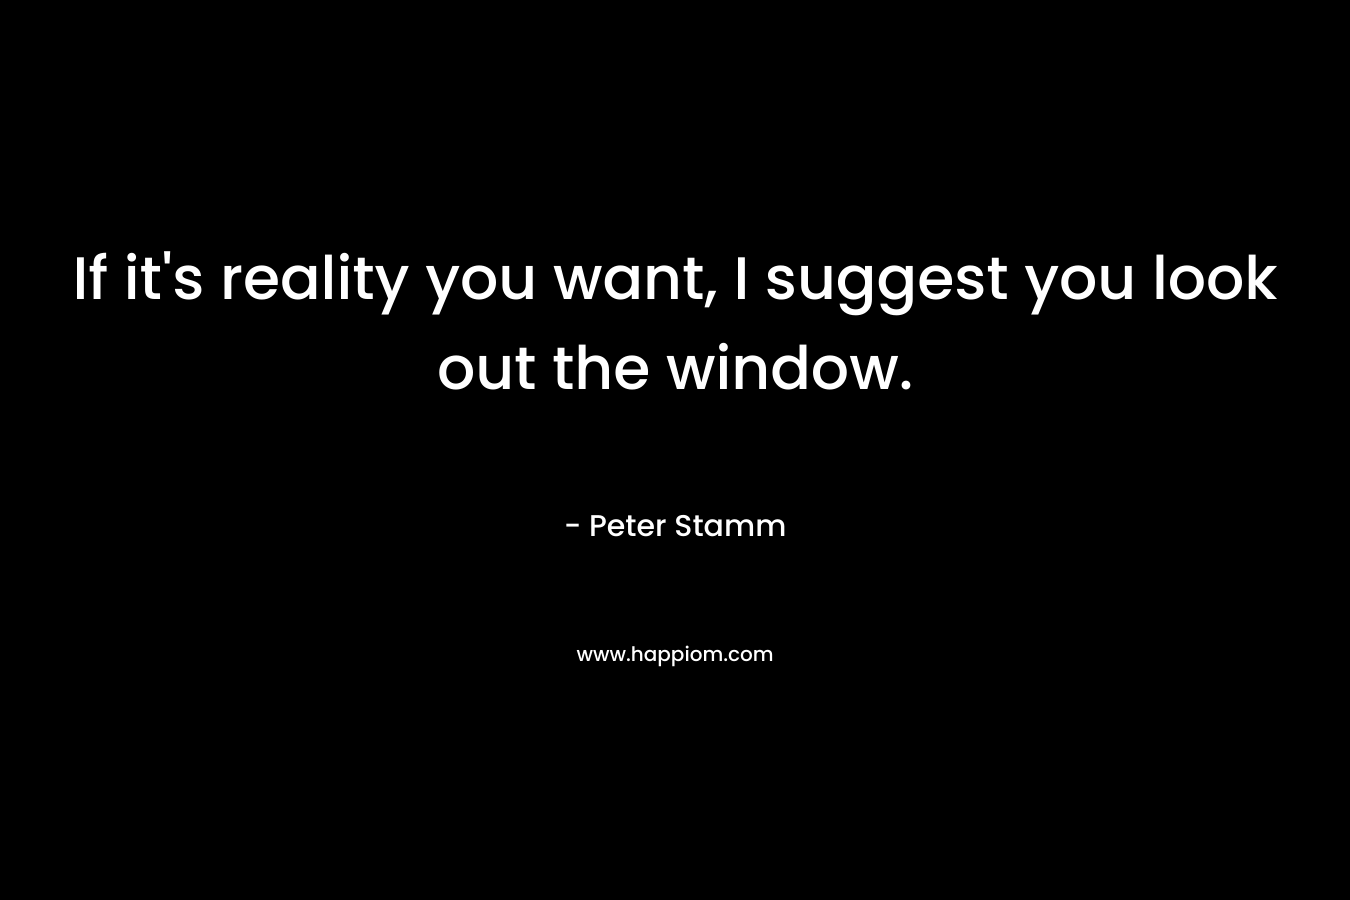 If it's reality you want, I suggest you look out the window.